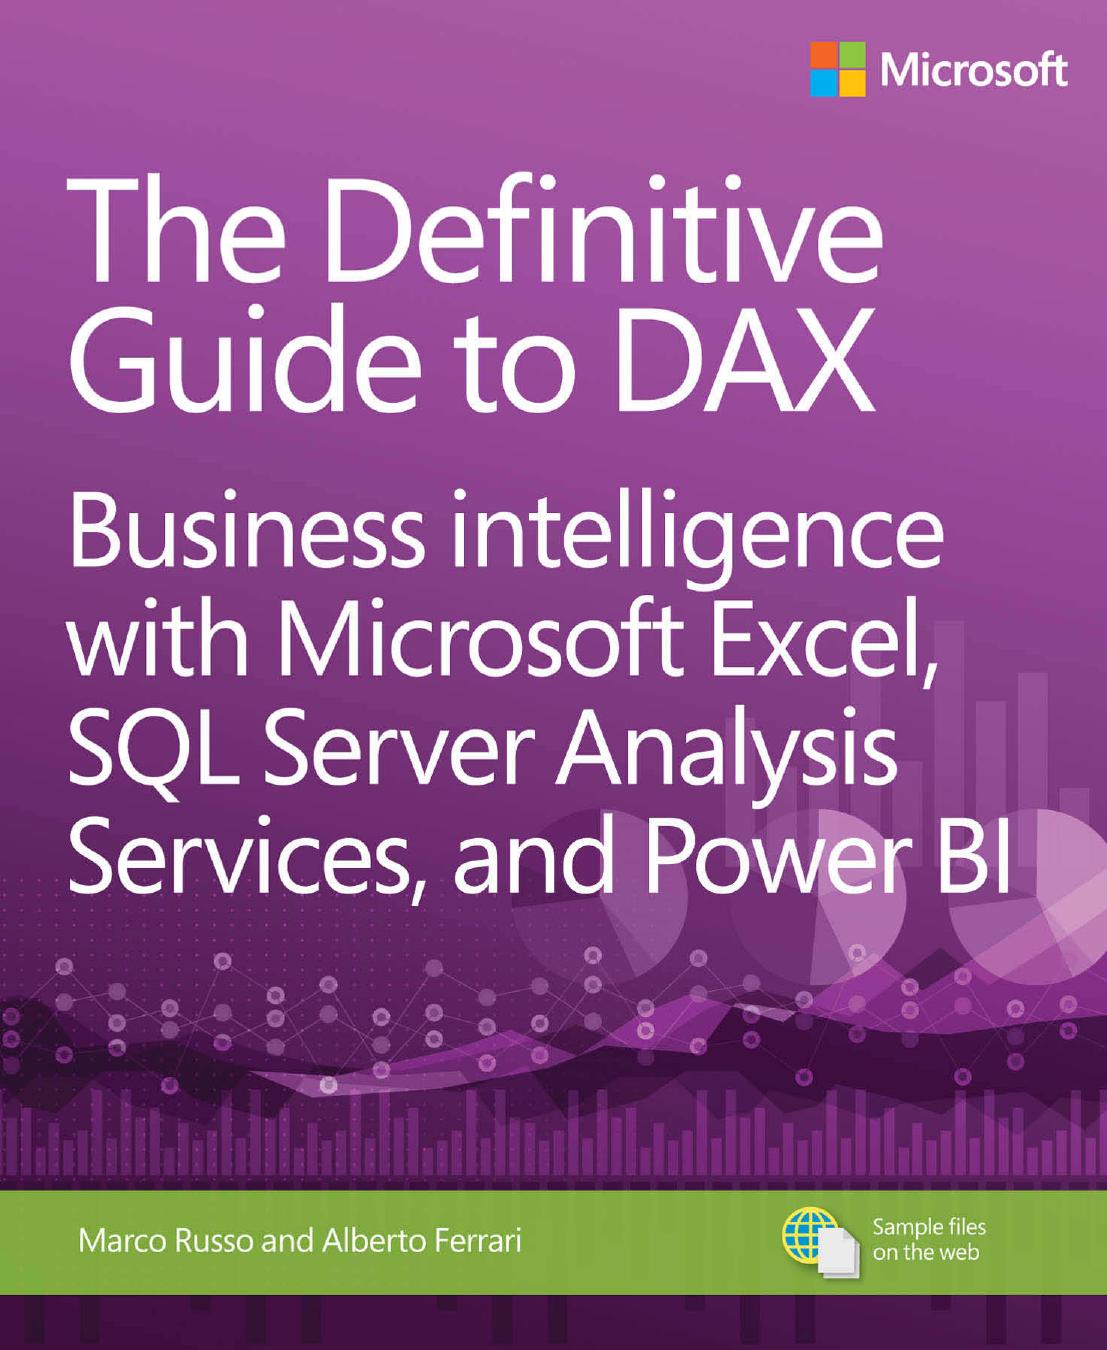 Definitive Guide to DAX_ Business intelligence with Microsoft Excel, SQL Server Analysis Services, and Power BI, The.jpg